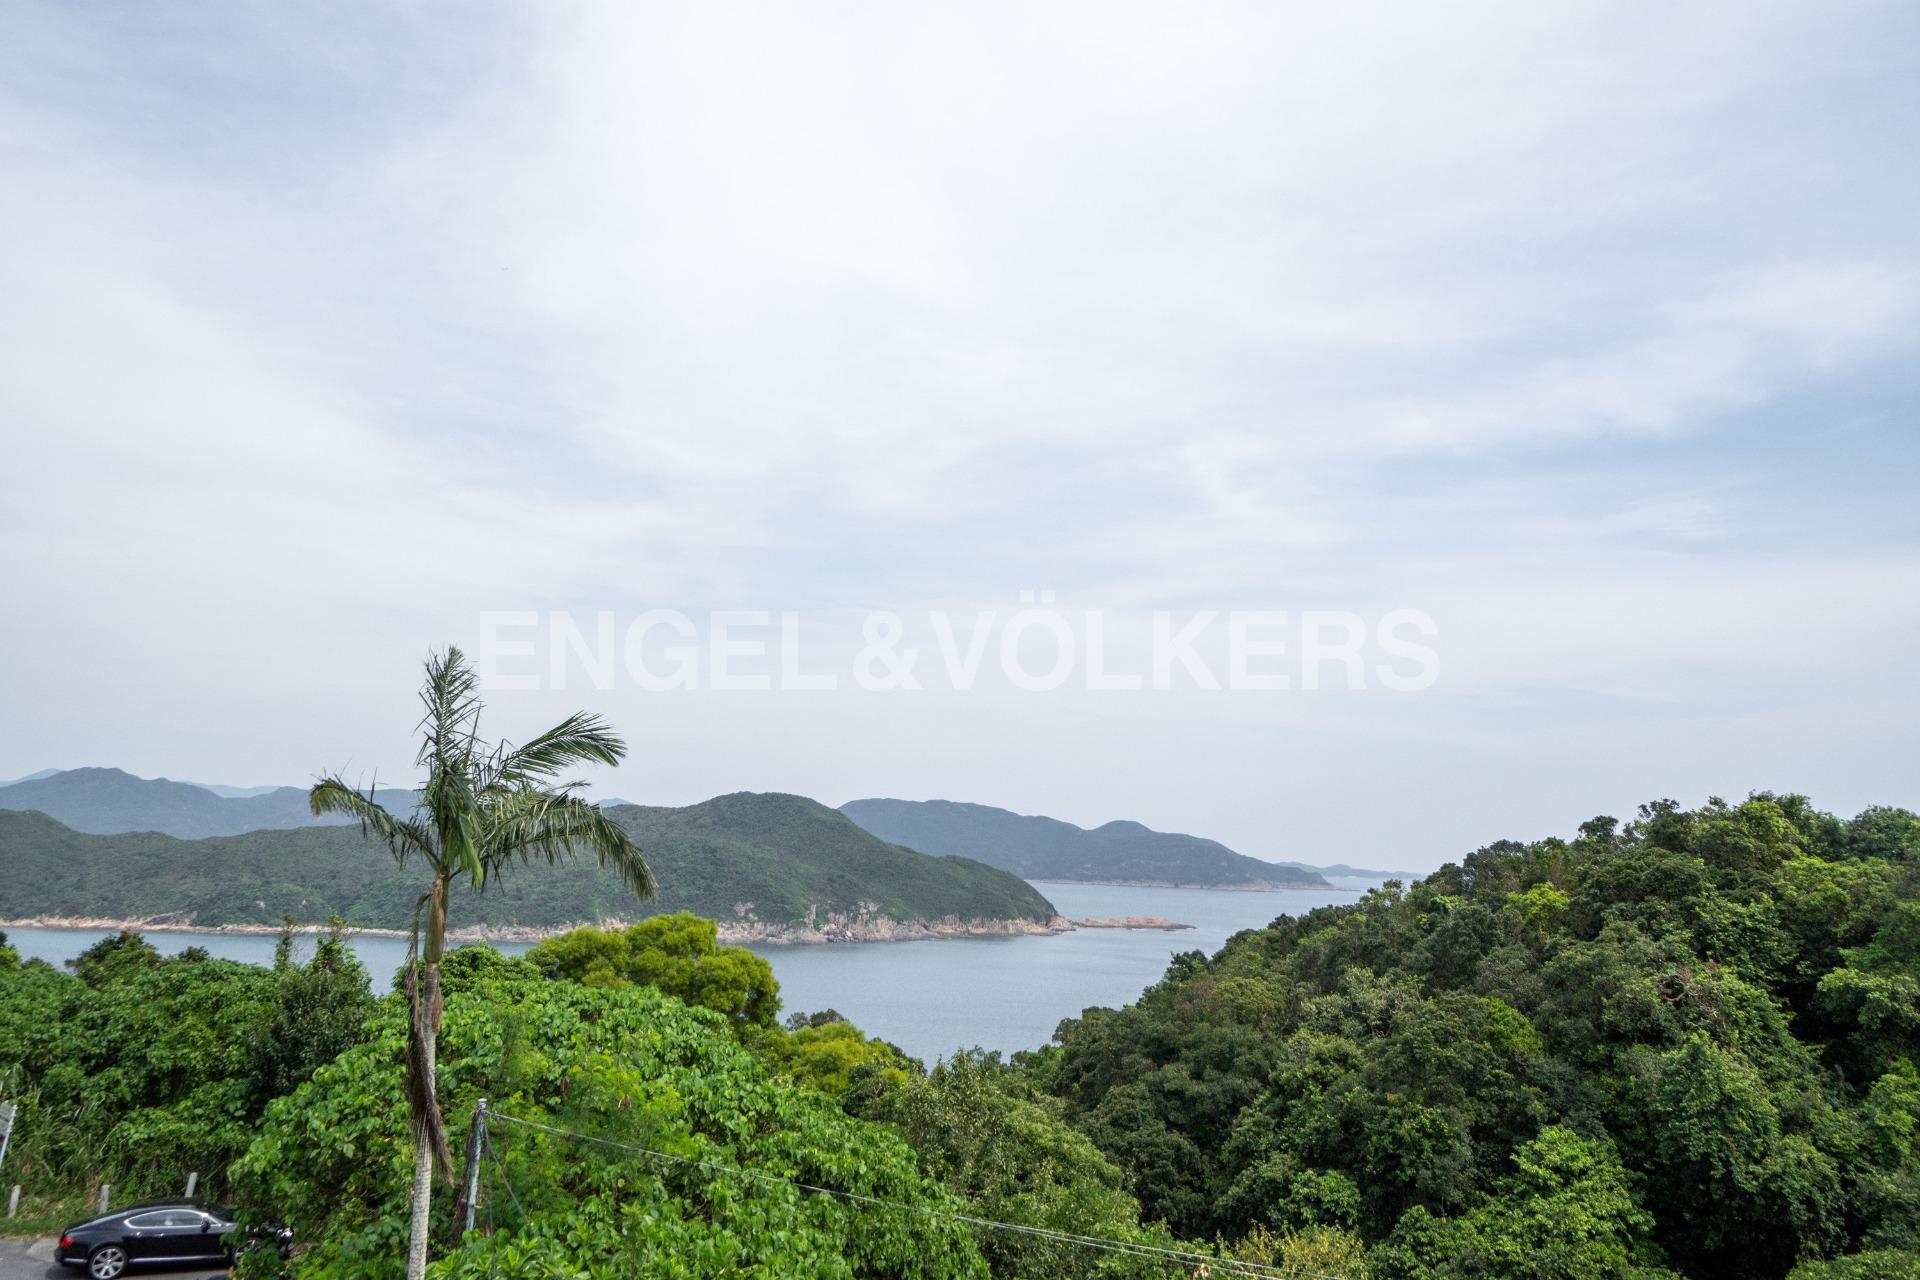 House in Sai Kung／Clear Water Bay - 38 Wing Lung Road 永隆路38號